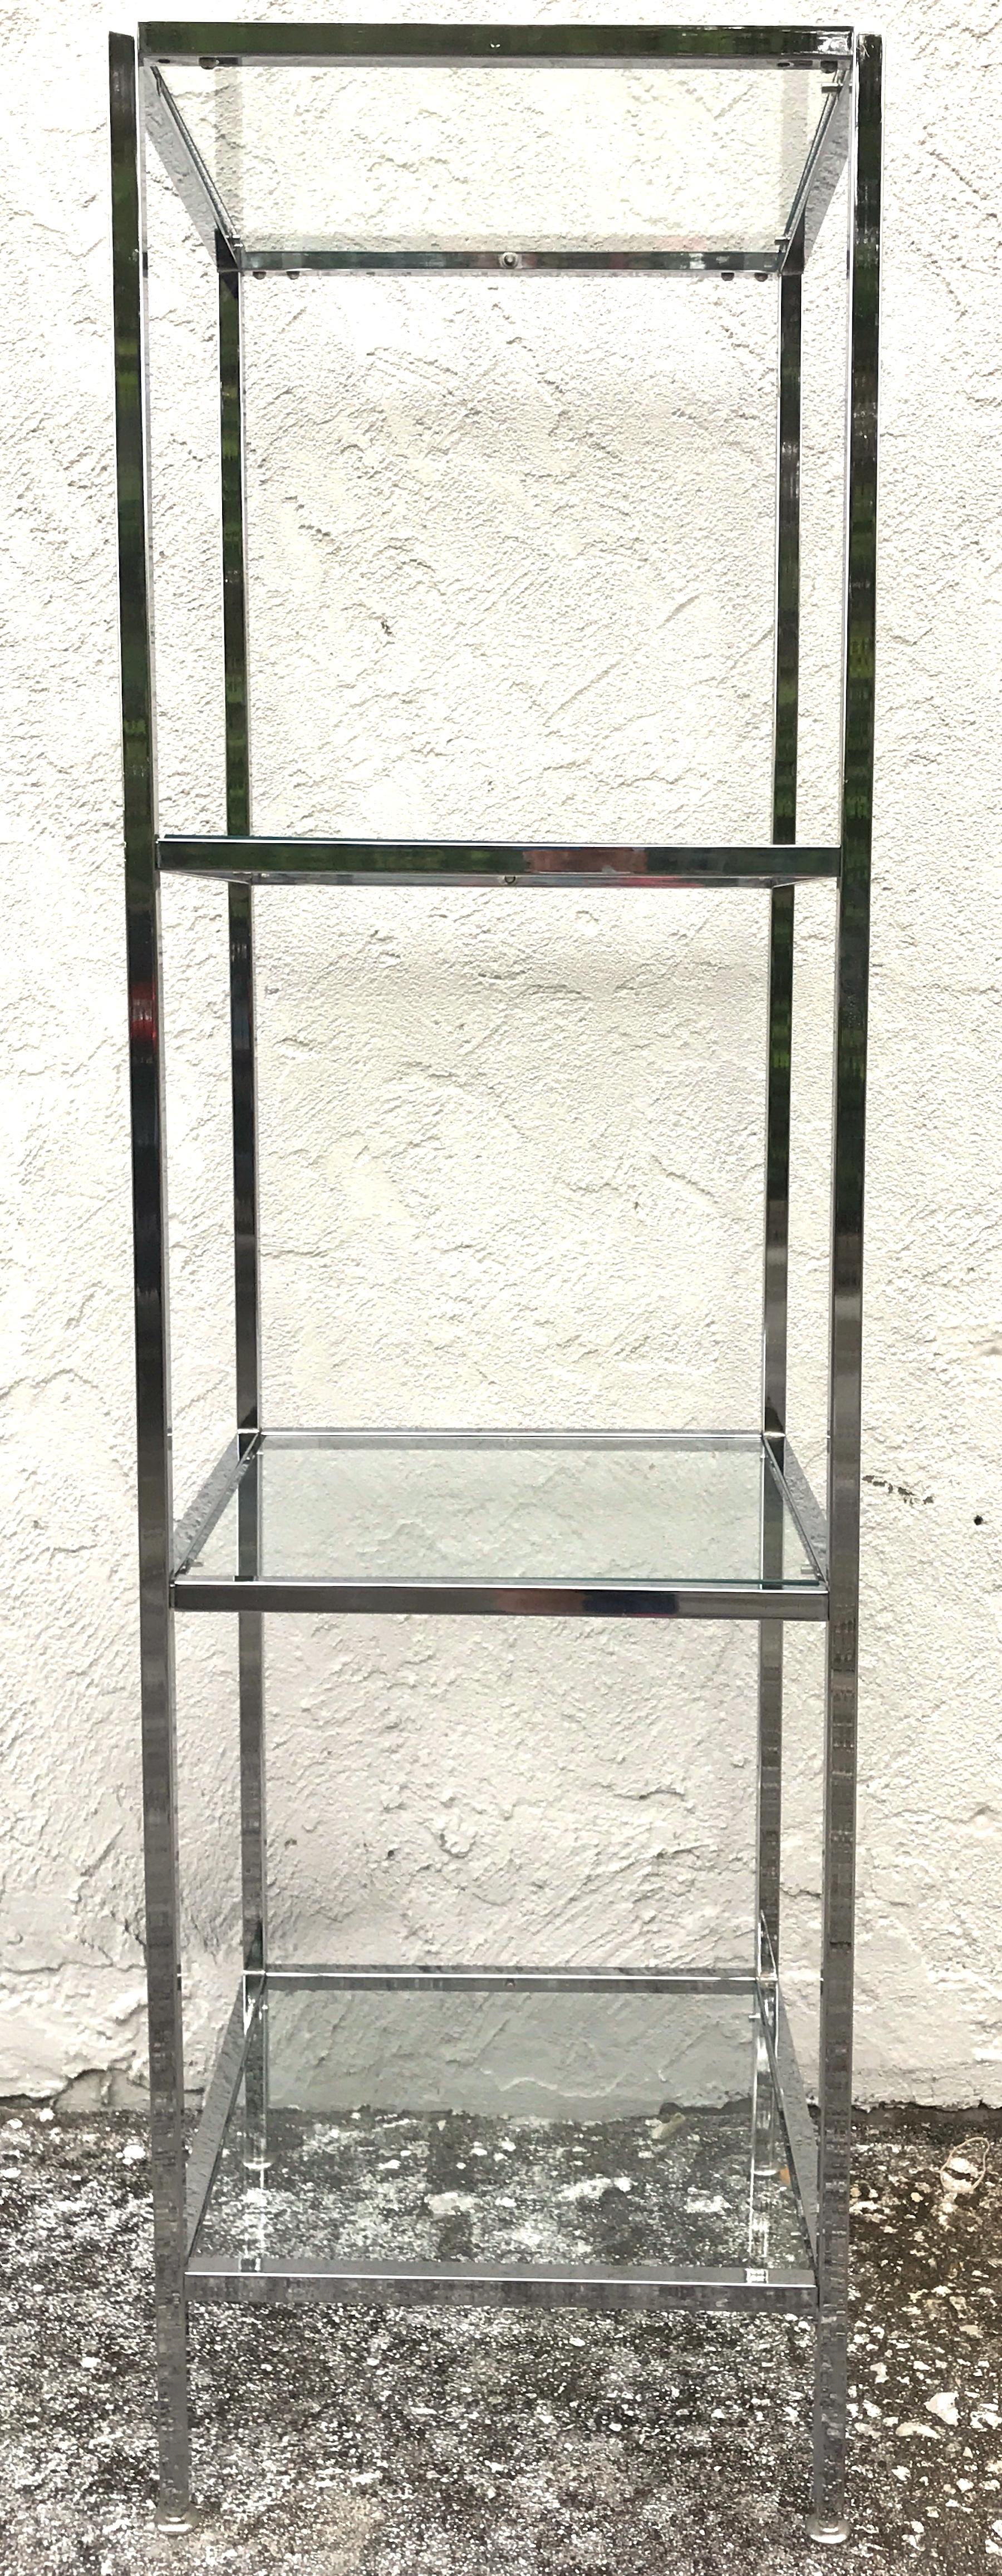 Milo Baughman style tall chrome and glass column étagère, 
Each one fitted with four 17 inch square clear glass shelves. Each cube shelf has a display height of 17.5